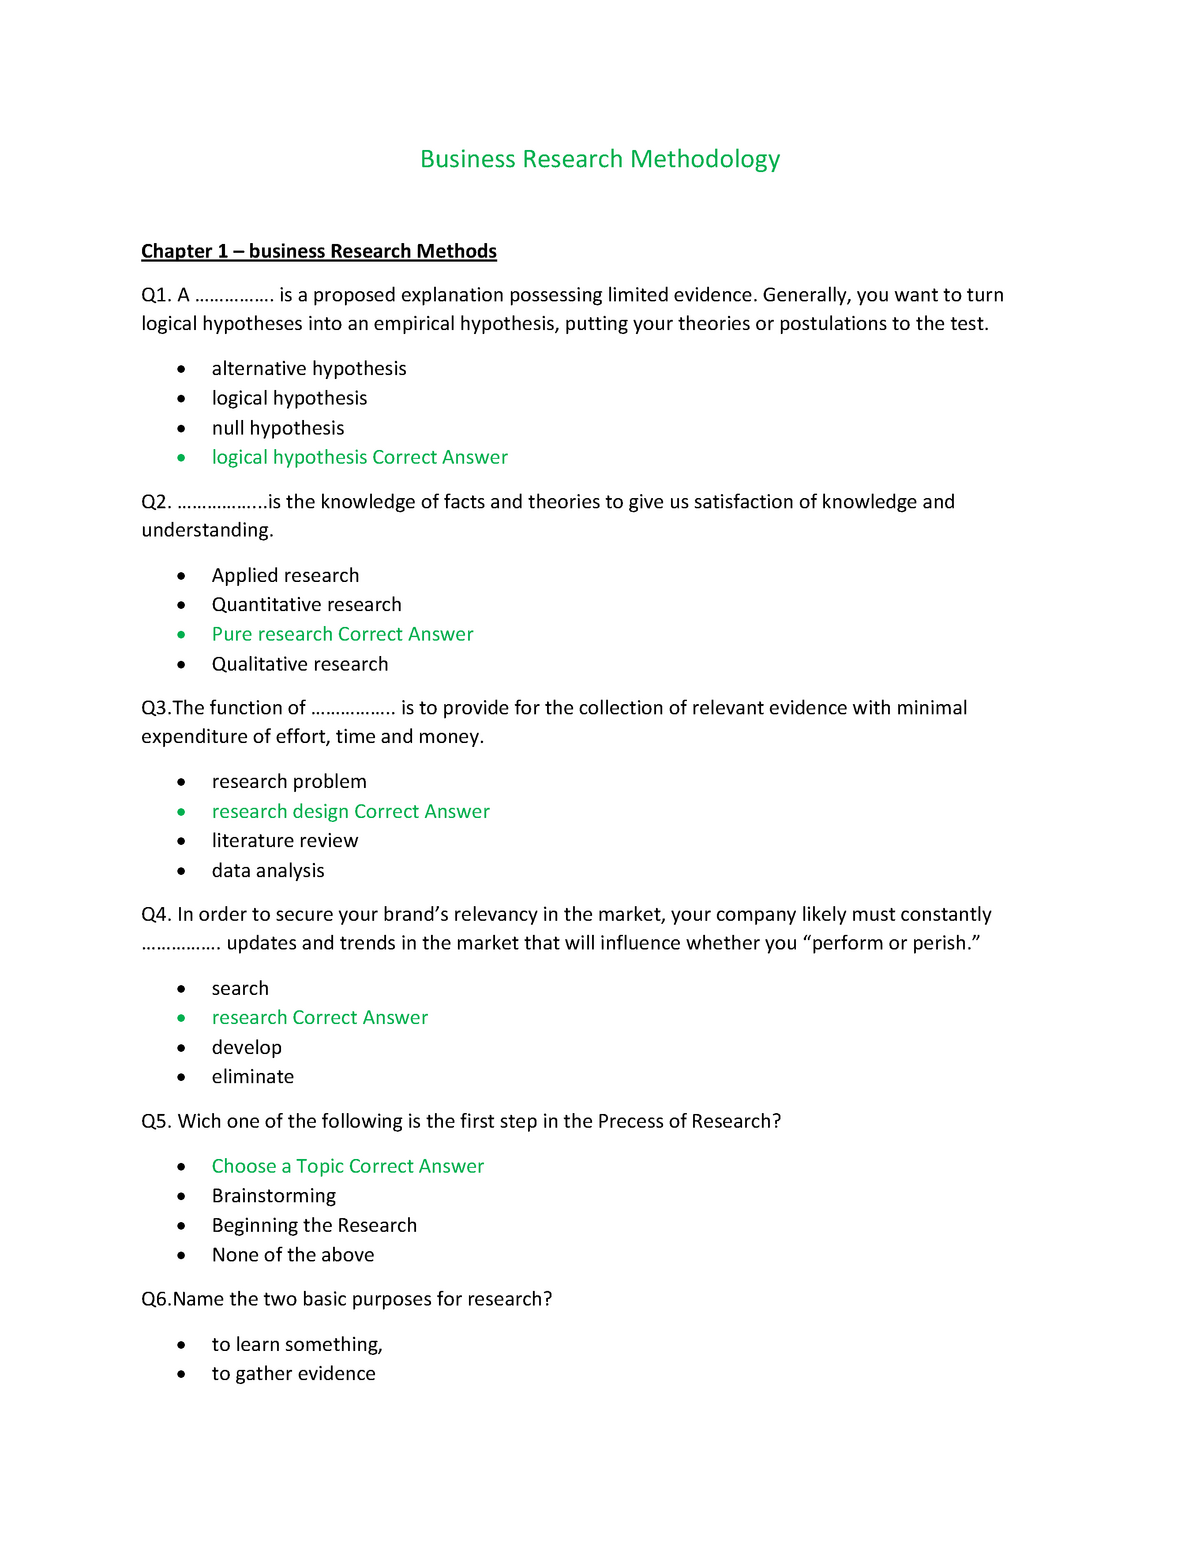 business research methodology exam questions and answers